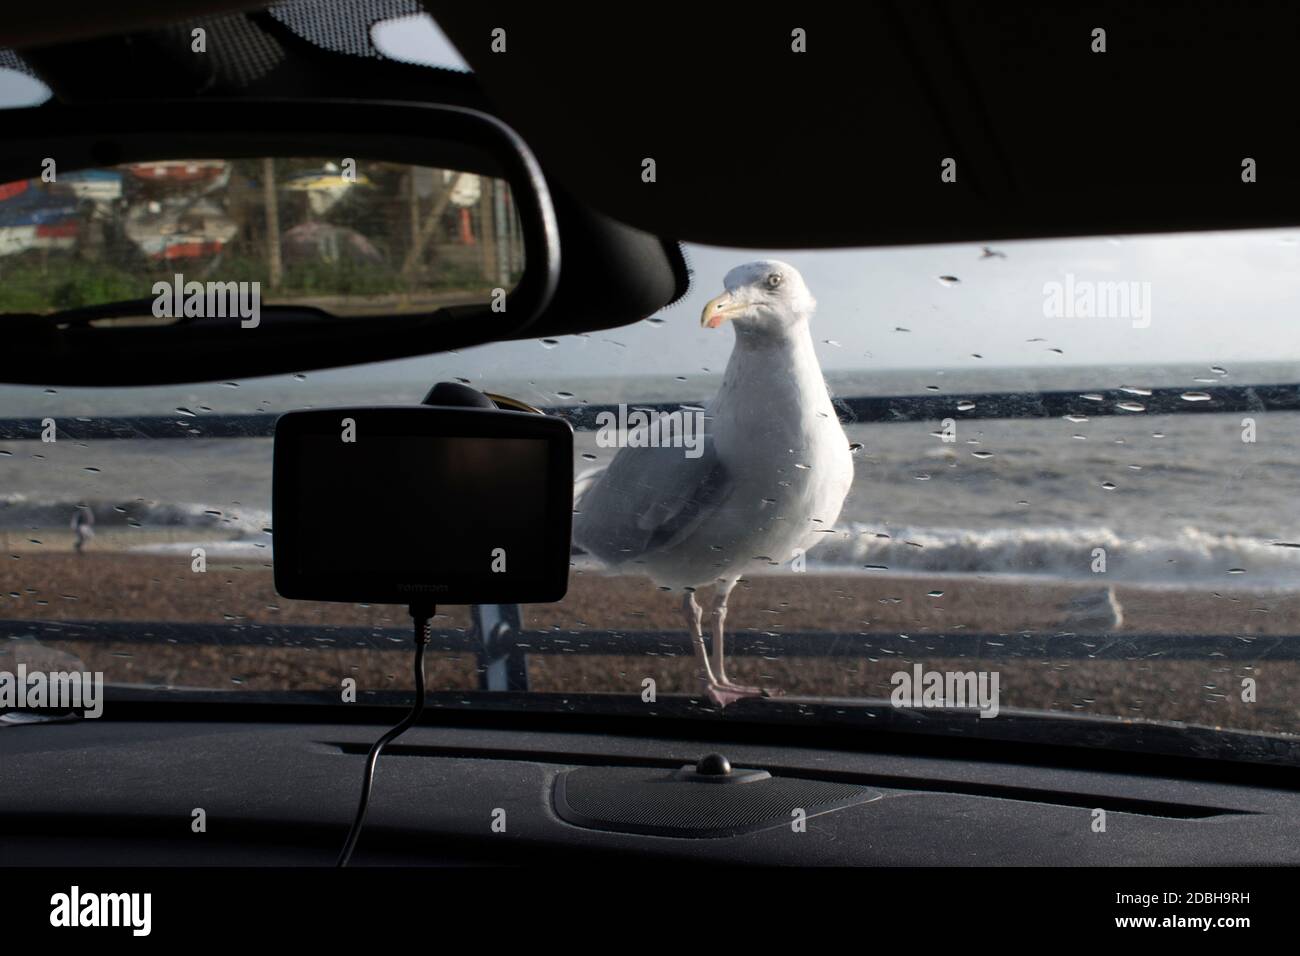 Herring Gull waiting to be fed. Commonly called Seagulls, being fed given food, something to eat, left over Fish and Chips. Landing on car bonnet. Unfazed just greedy and hungry. Hastings East Sussex 2020 2020s UK HOMER SYKES Stock Photo